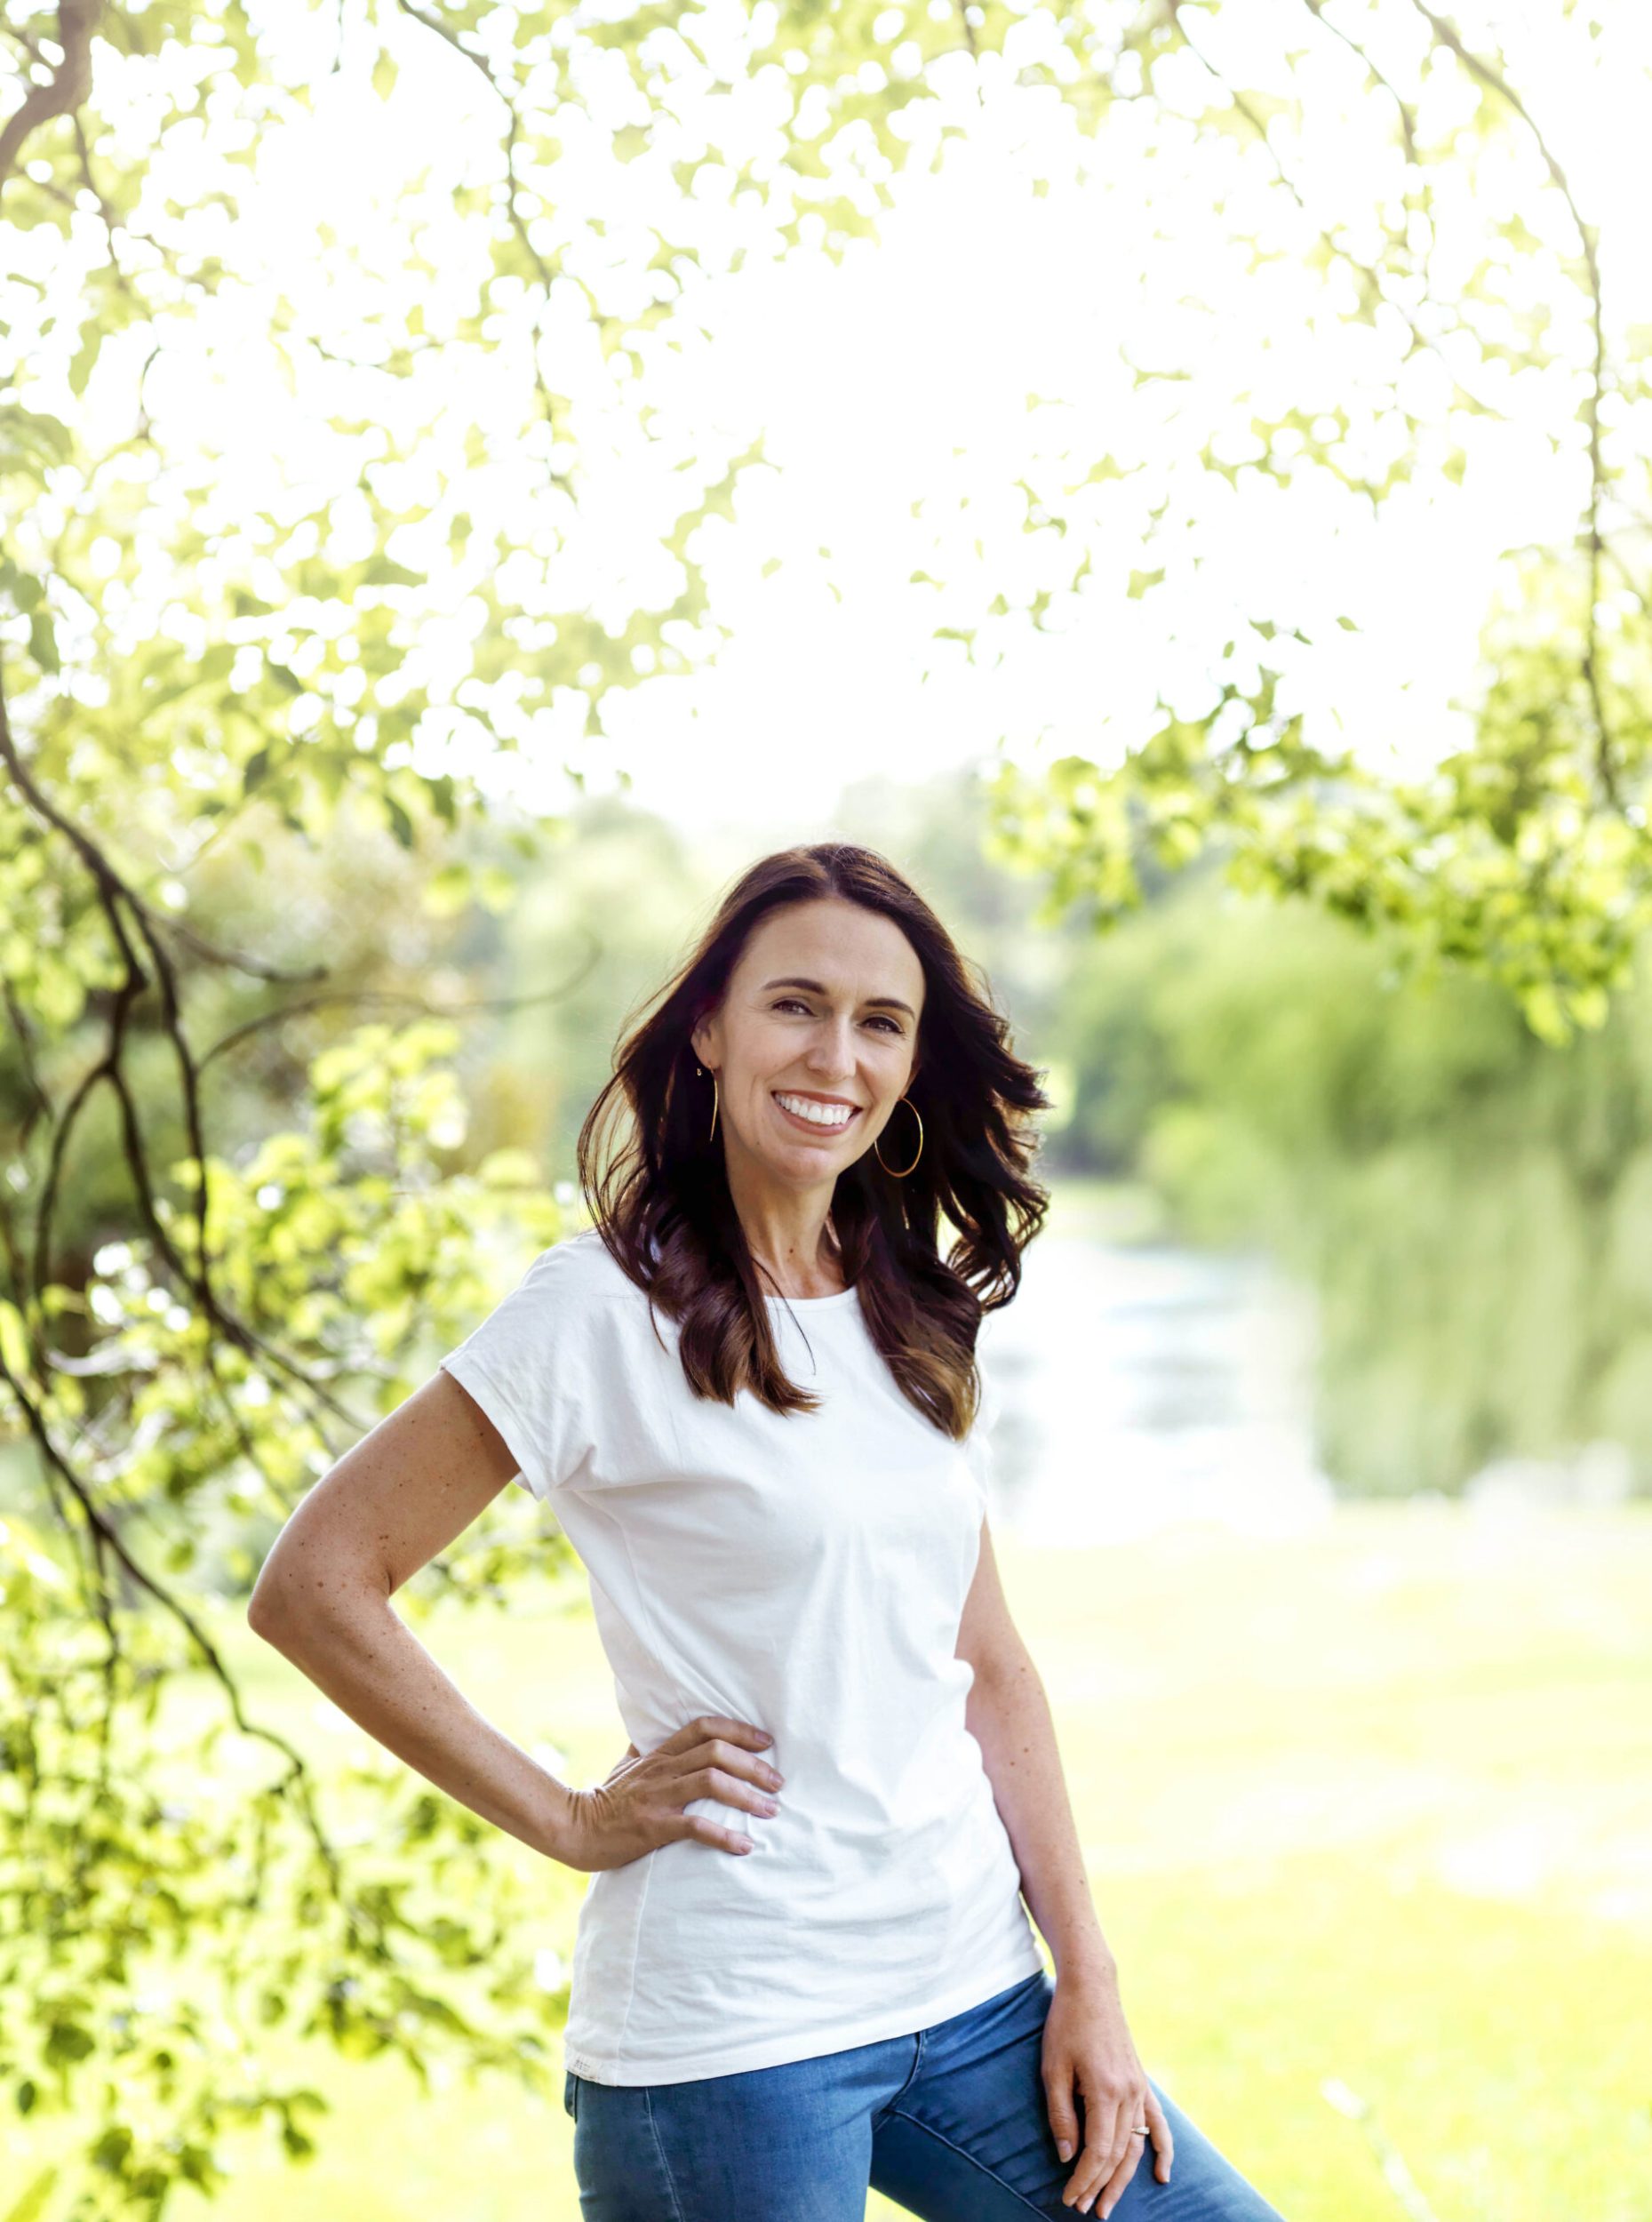 Jacinda Ardern wearing white shirt and blue jeans with hand on hip